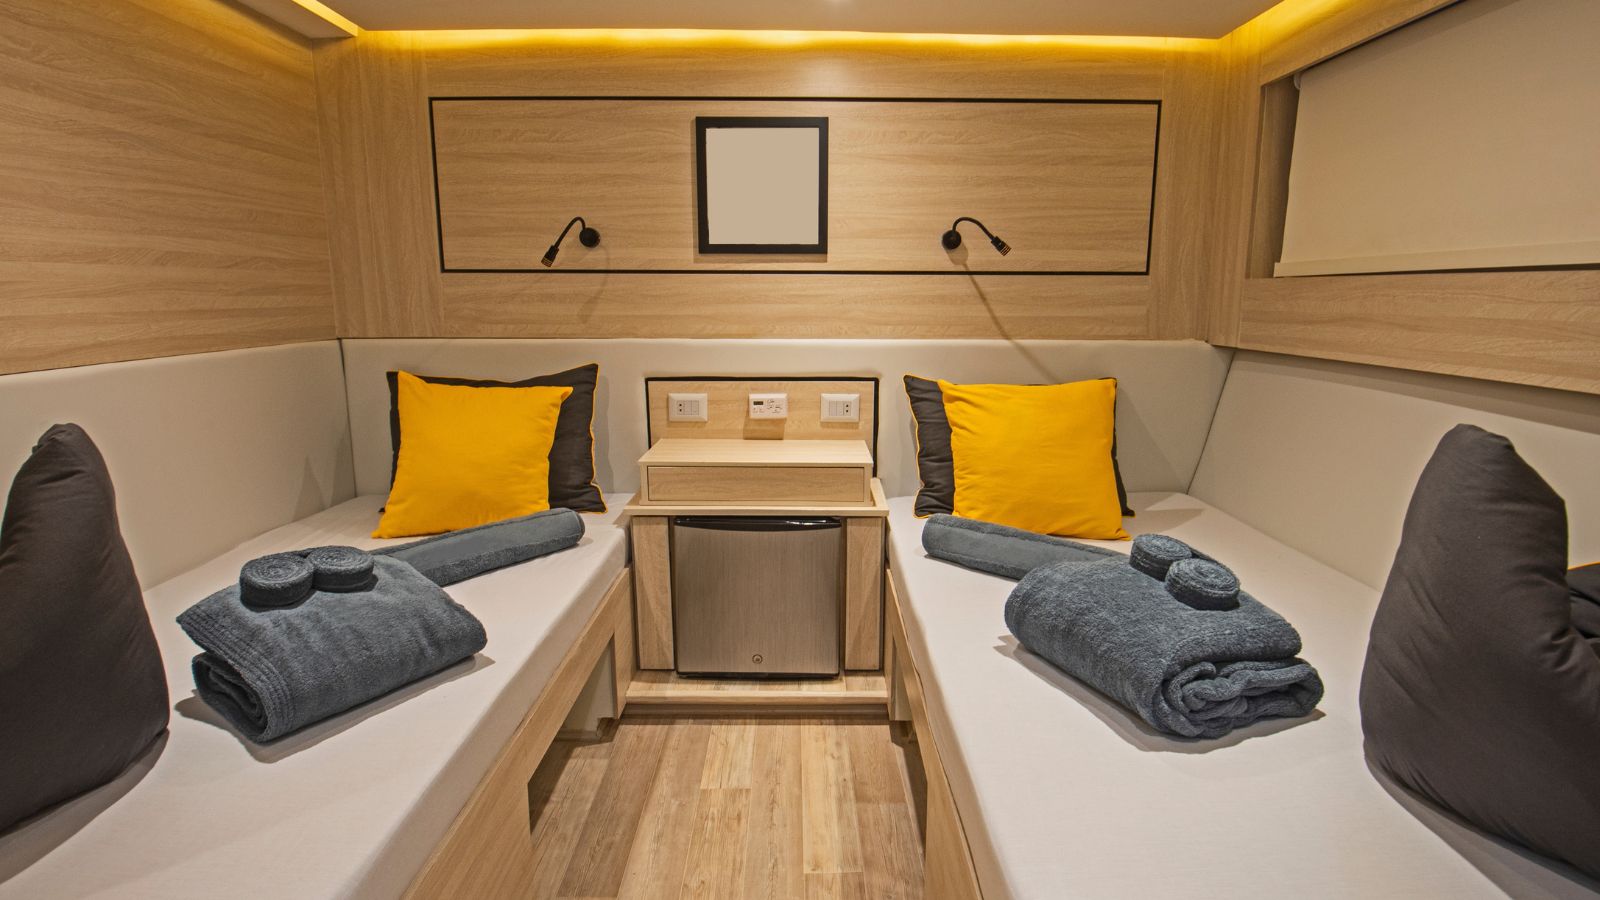 <p><span>Balcony </span><a href="https://cruisingkids.co.uk/what-is-a-stateroom-on-a-cruise-ship-ultimate-guide/" rel="noopener"><span>cabins and suites</span></a><span> can be expensive to purchase. An Interior cabin is the least costly on a cruise ship. An interior stateroom will not have a window, but they have all the same amenities as another cabin, such as a bed, a bathroom, and a TV. Check the price differences before you book.</span></p>